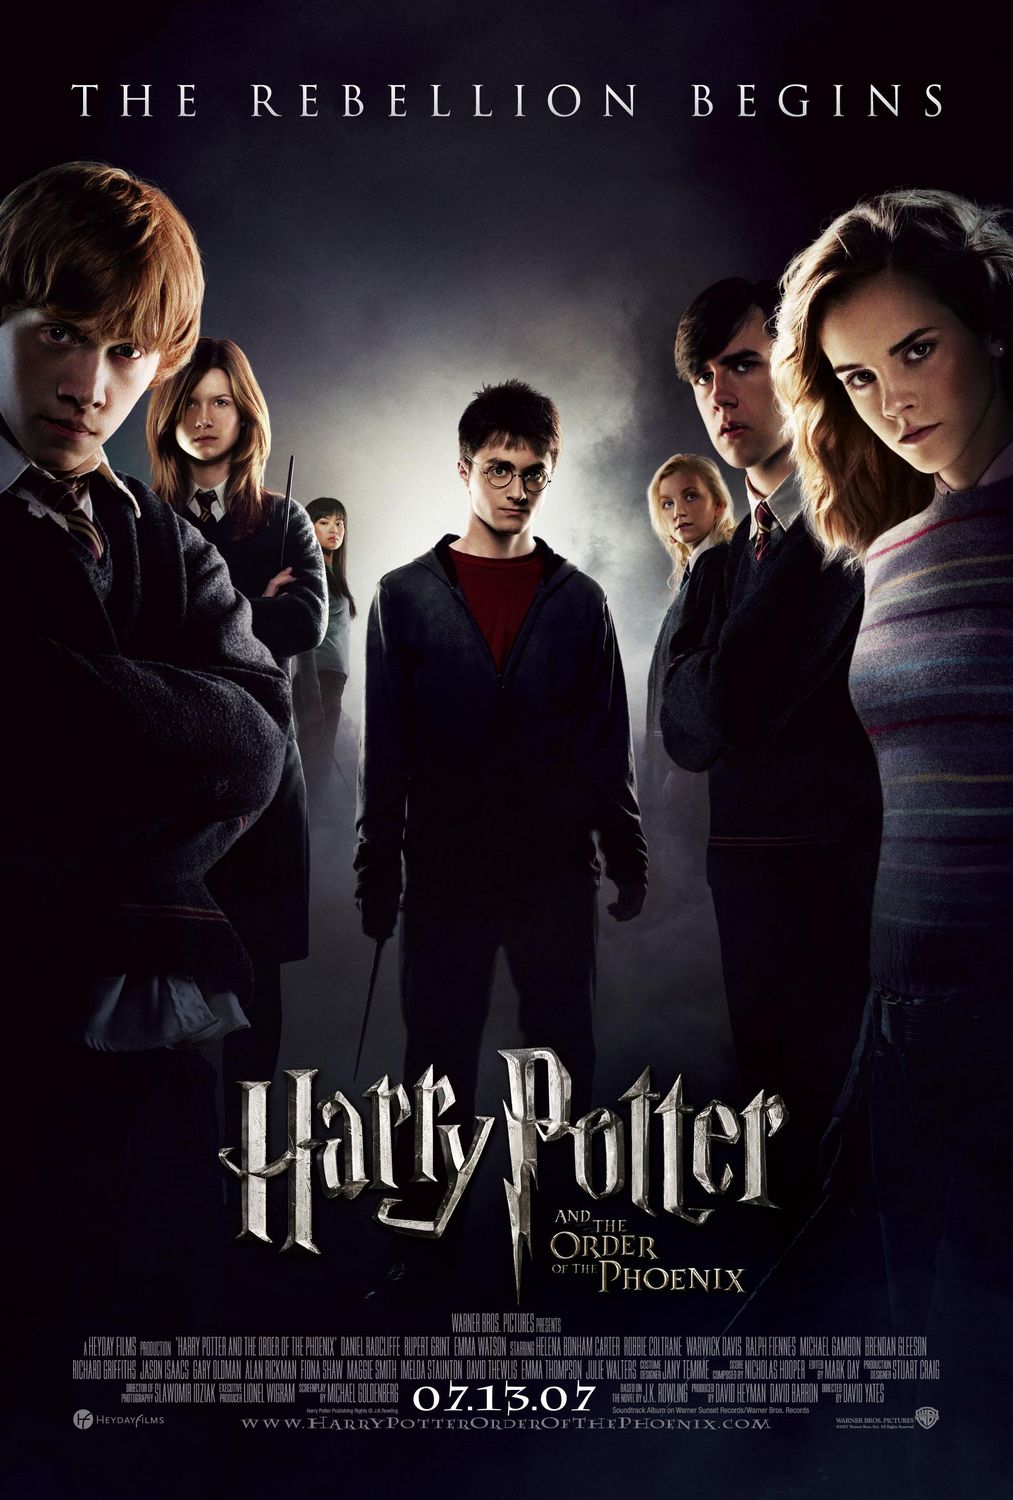 Harry Potter and the Order of the Phoenix Warner Bros image